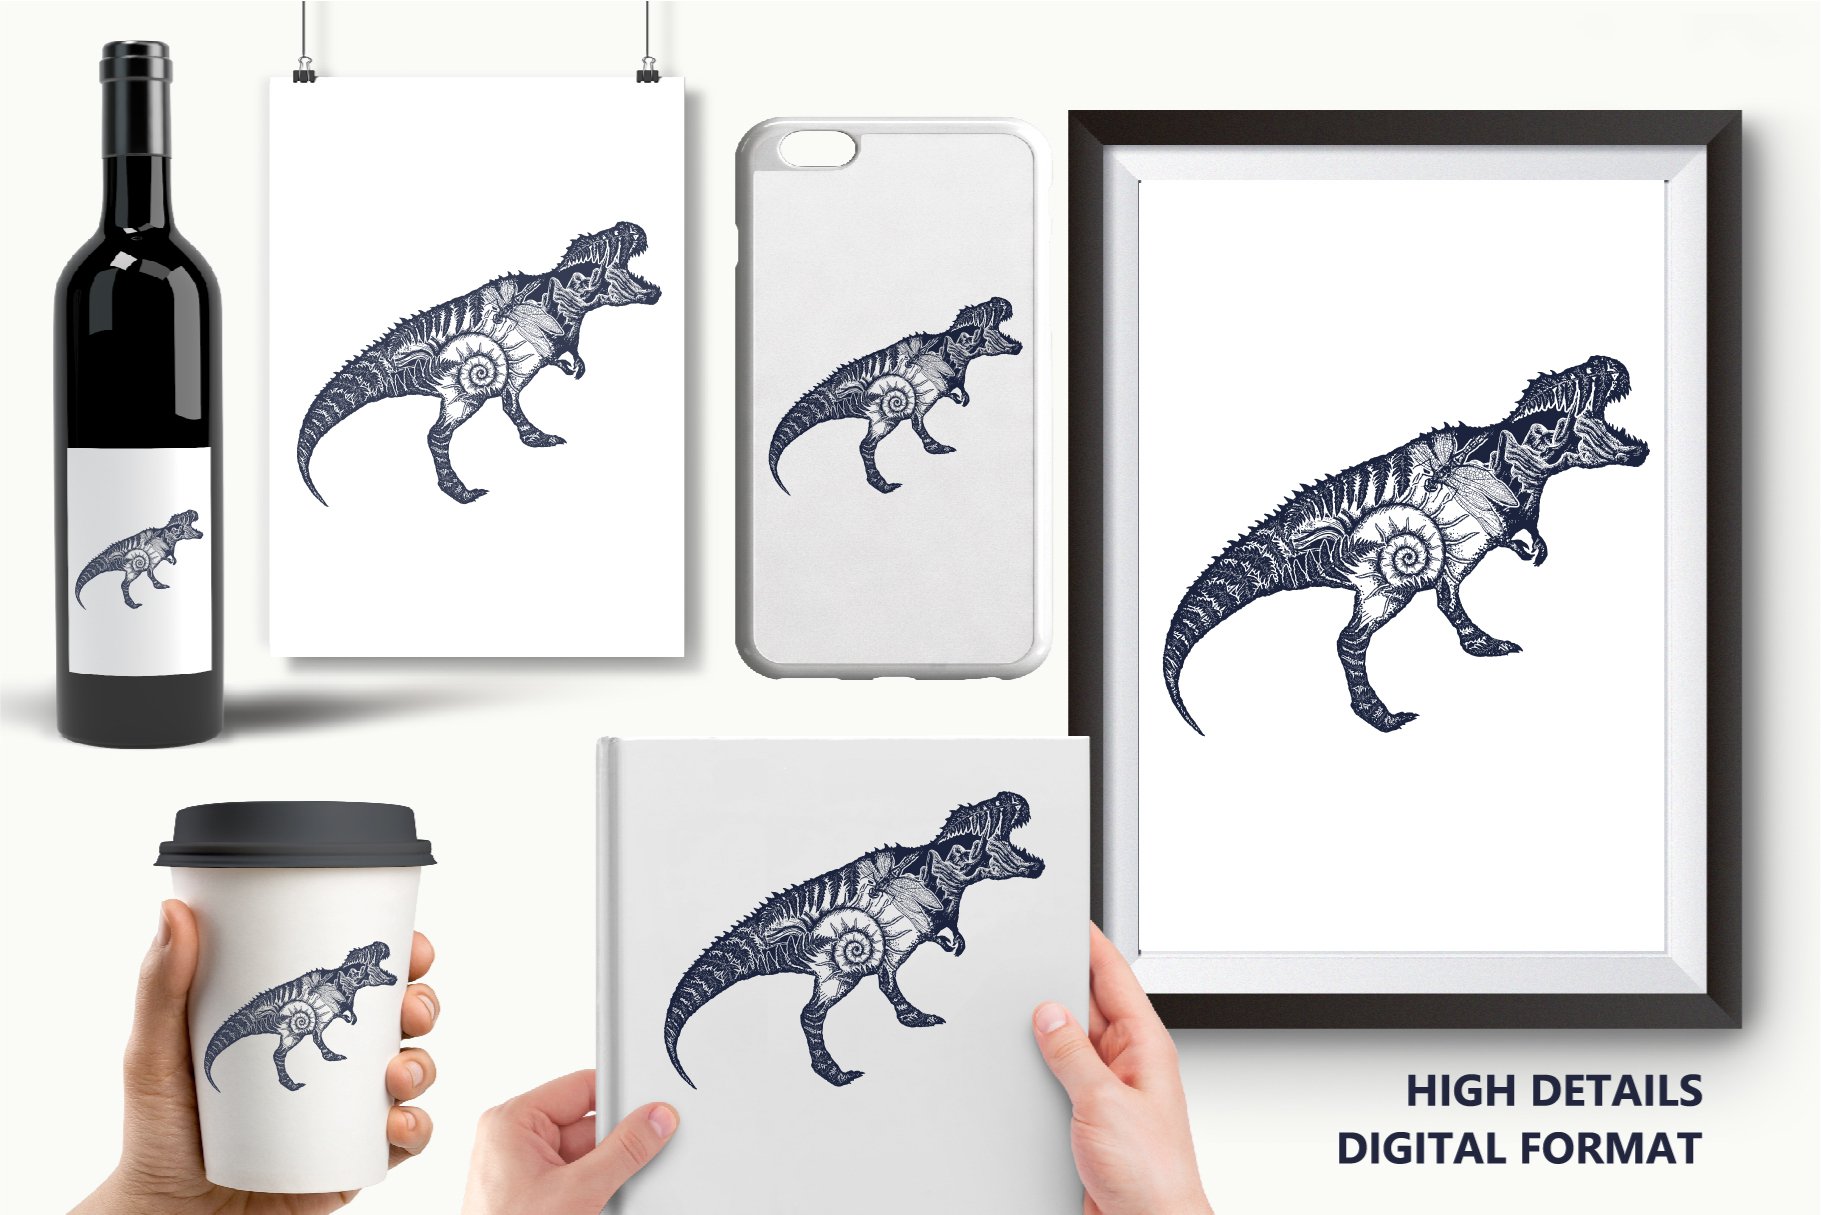 Use this dinosaur graphic for the mobile case and poster.